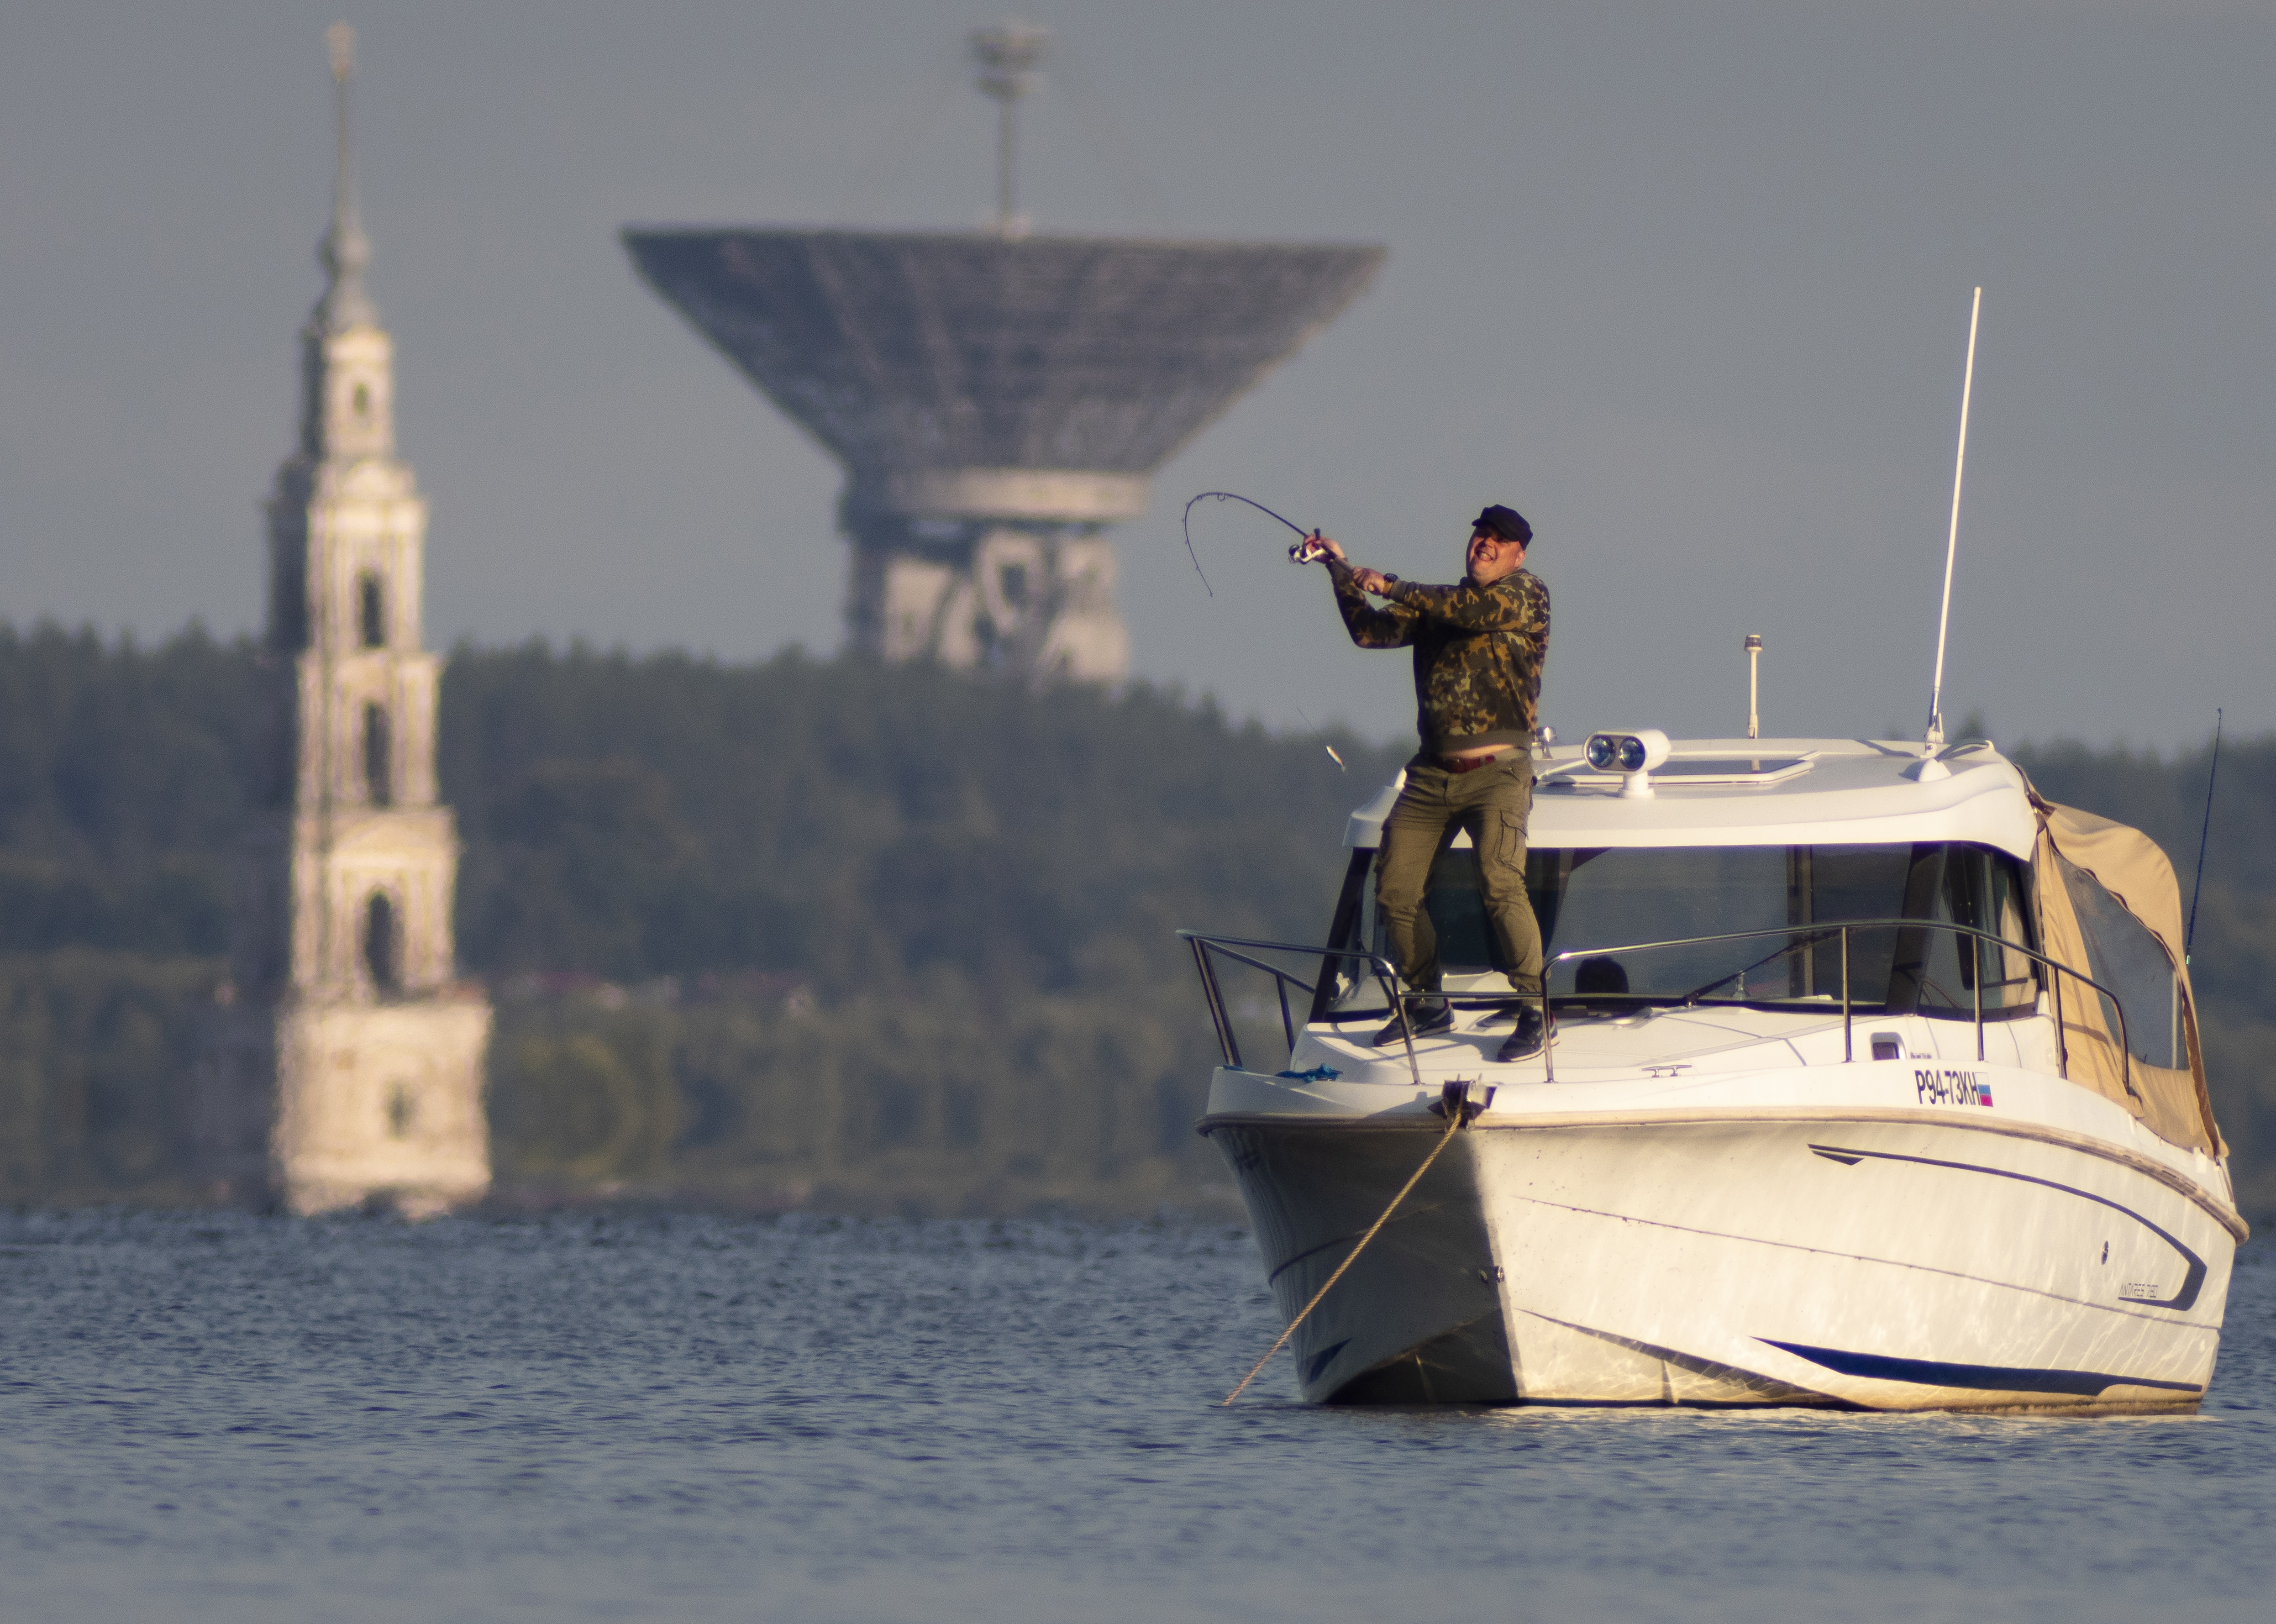 In this Sunday, Aug. 11, 2019 photo a man fishes near the famous Kalyazin Bell Tower, part of the submerged monastery of St. Nicholas and giant antenna of the Kalyazin radio astronomy observatory in the town of Kalyazin located on the Volga River, 180 km (111 miles) north-east of Moscow, Russia. (AP Photo/Dmitri Lovetsky)